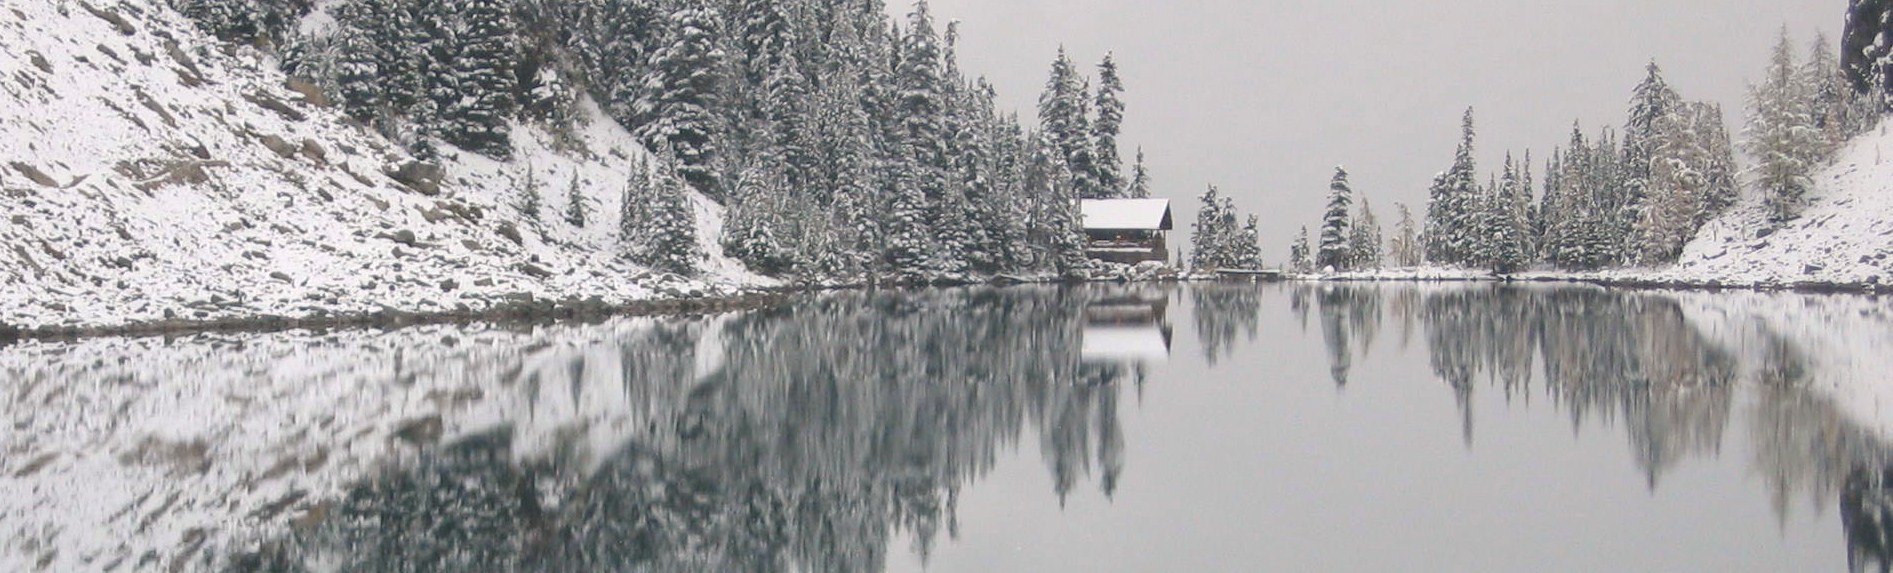 Cottage on lake in winter.